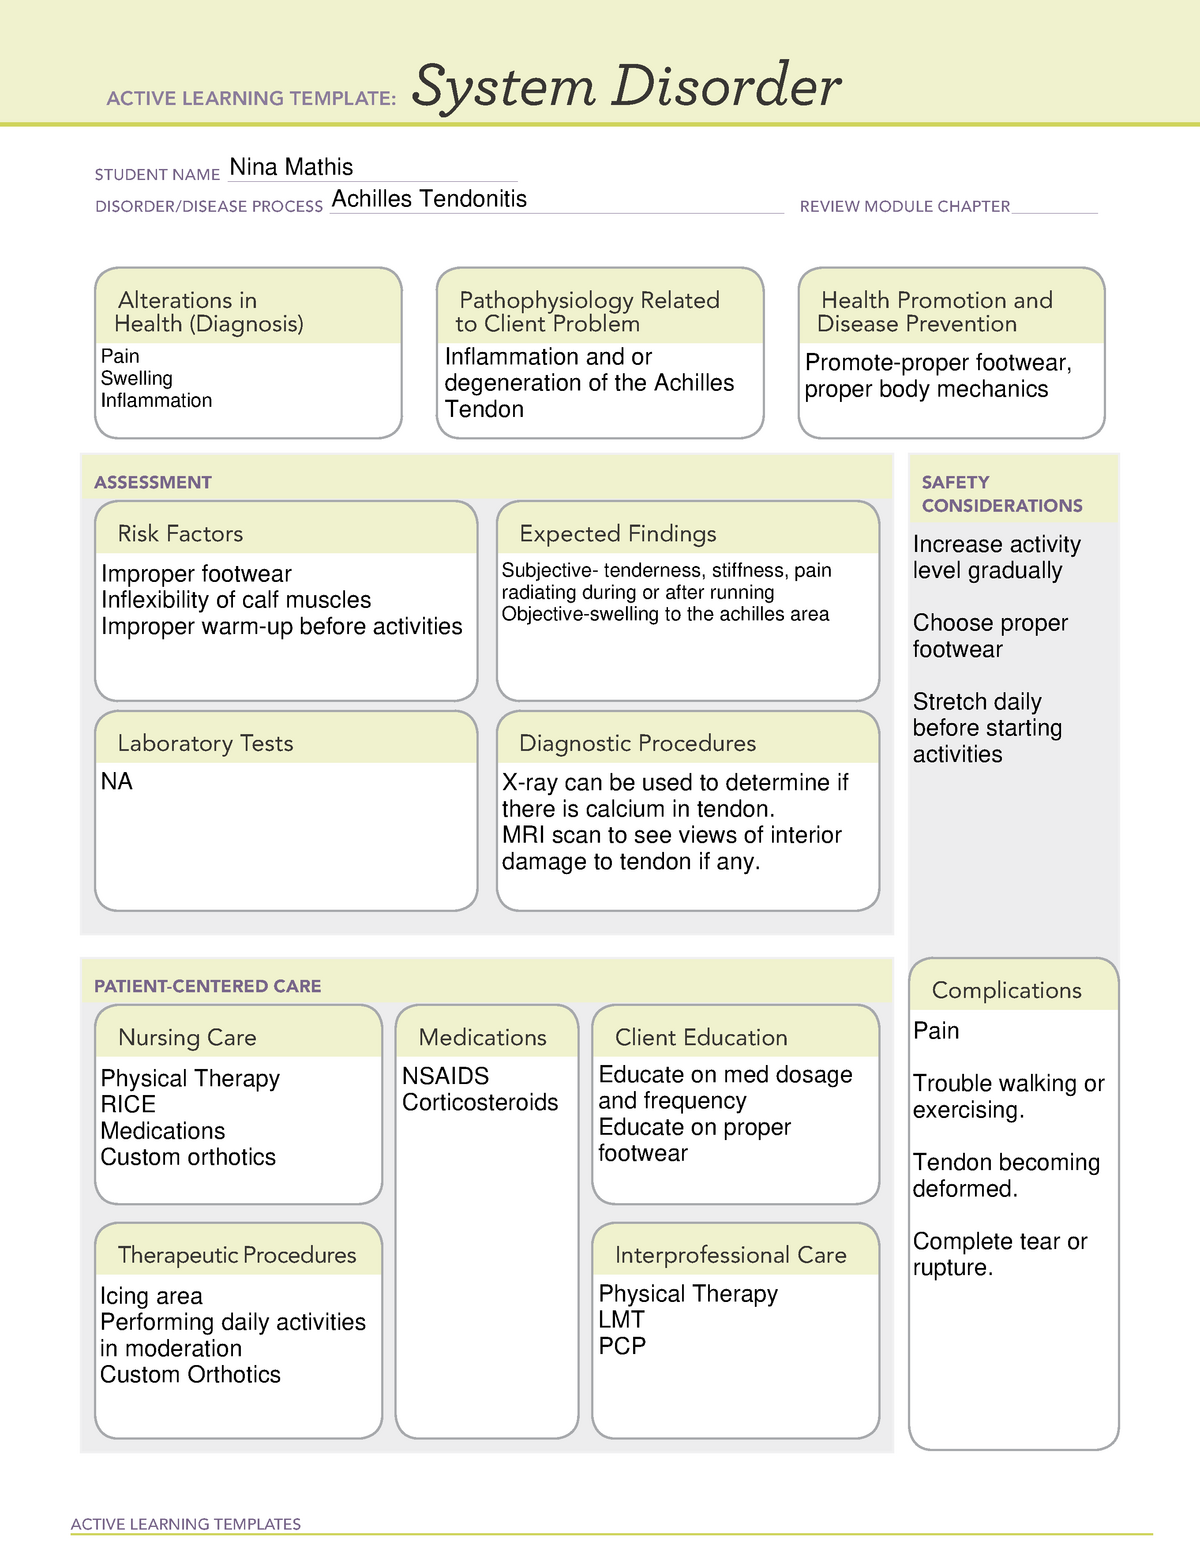 system-disorder-corrected-one-active-learning-templates-system